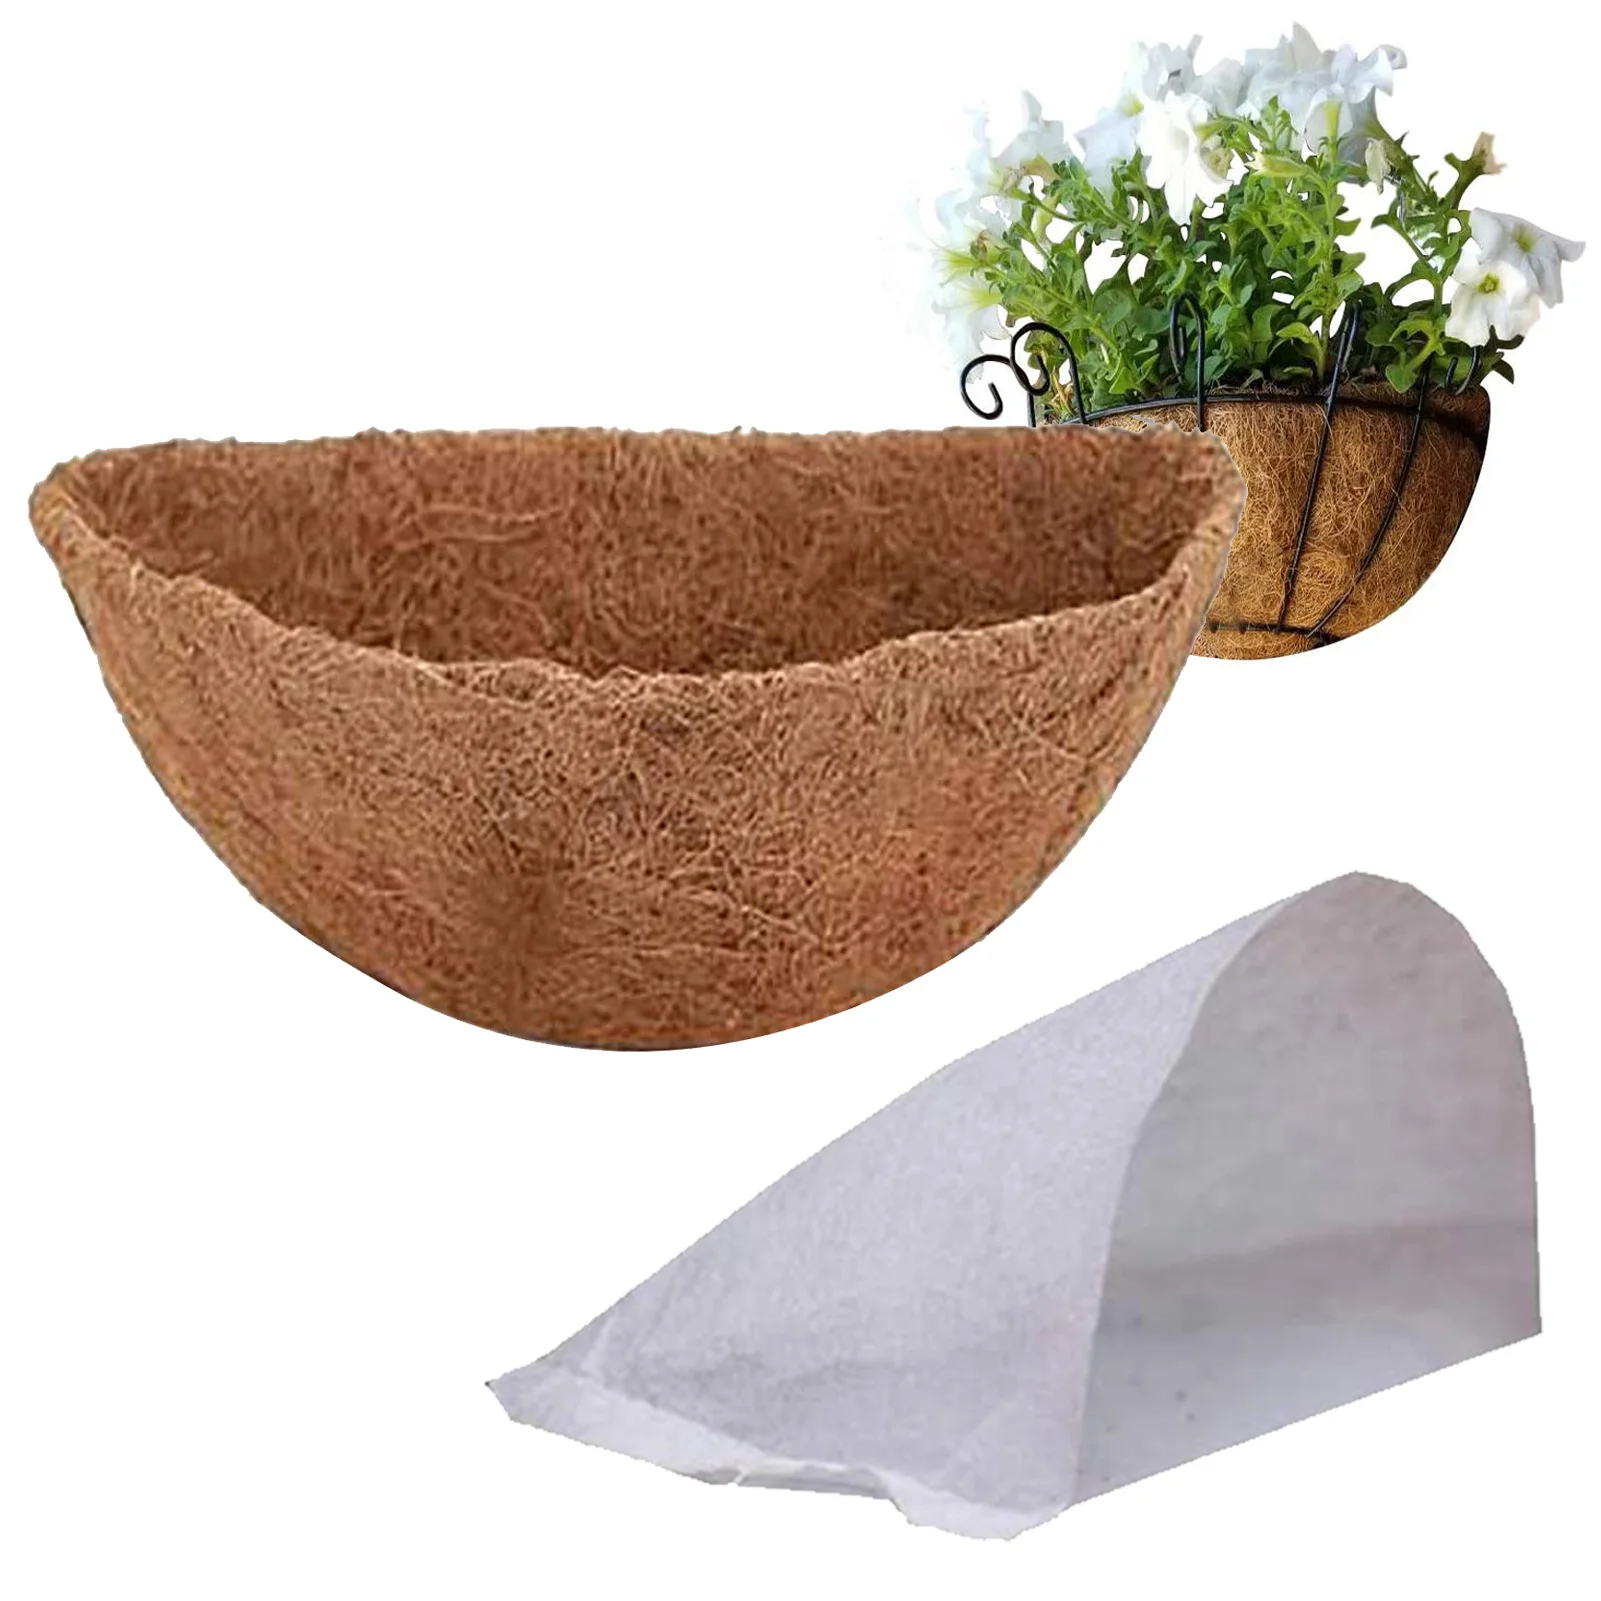 Coco Fiber Liners For Planters 14 Inch Round Replacement Coconut Fiber Planter Liner Good Water Retention Better Breathability